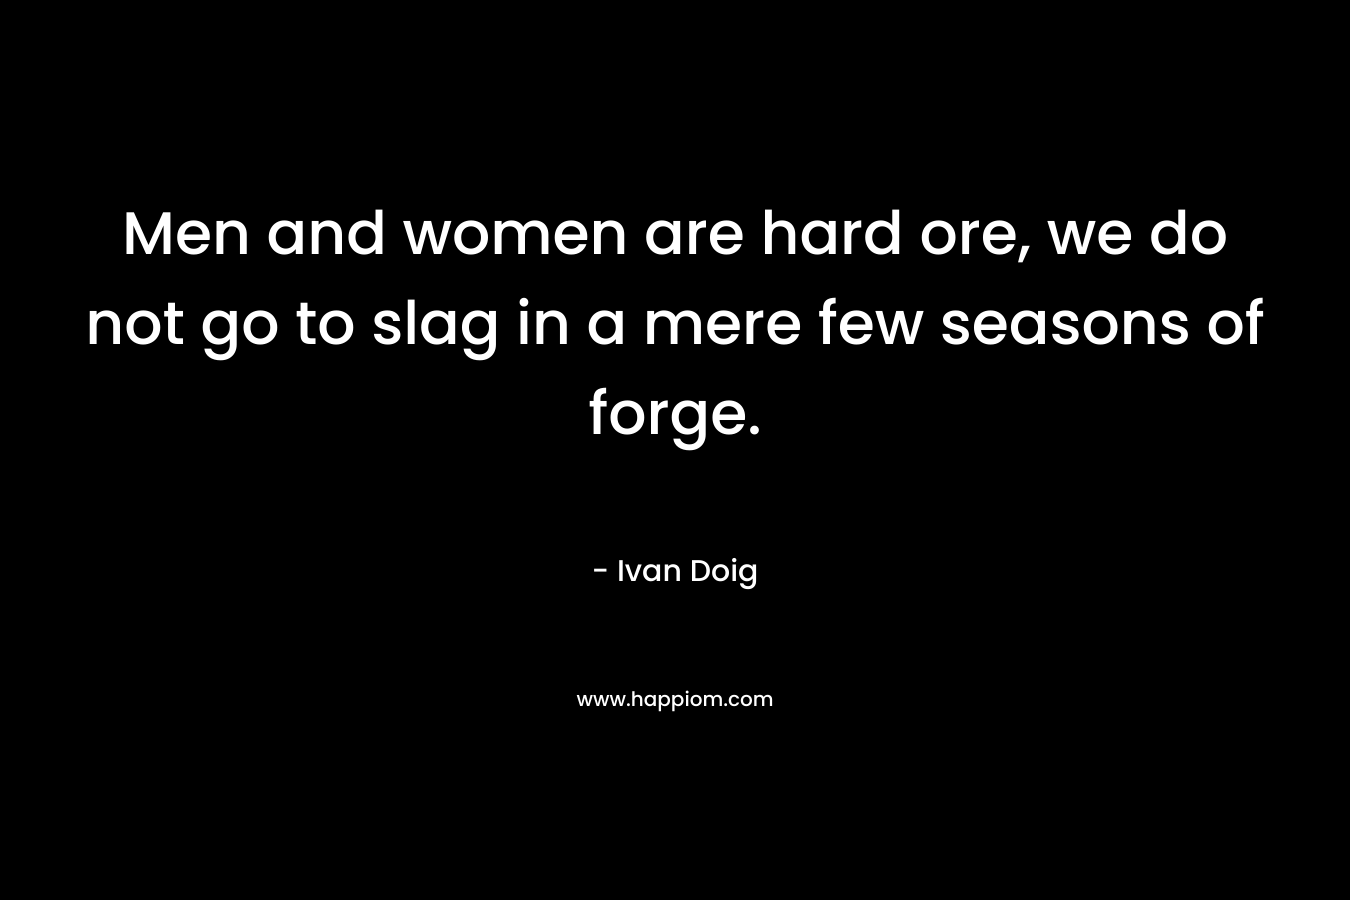 Men and women are hard ore, we do not go to slag in a mere few seasons of forge. – Ivan Doig